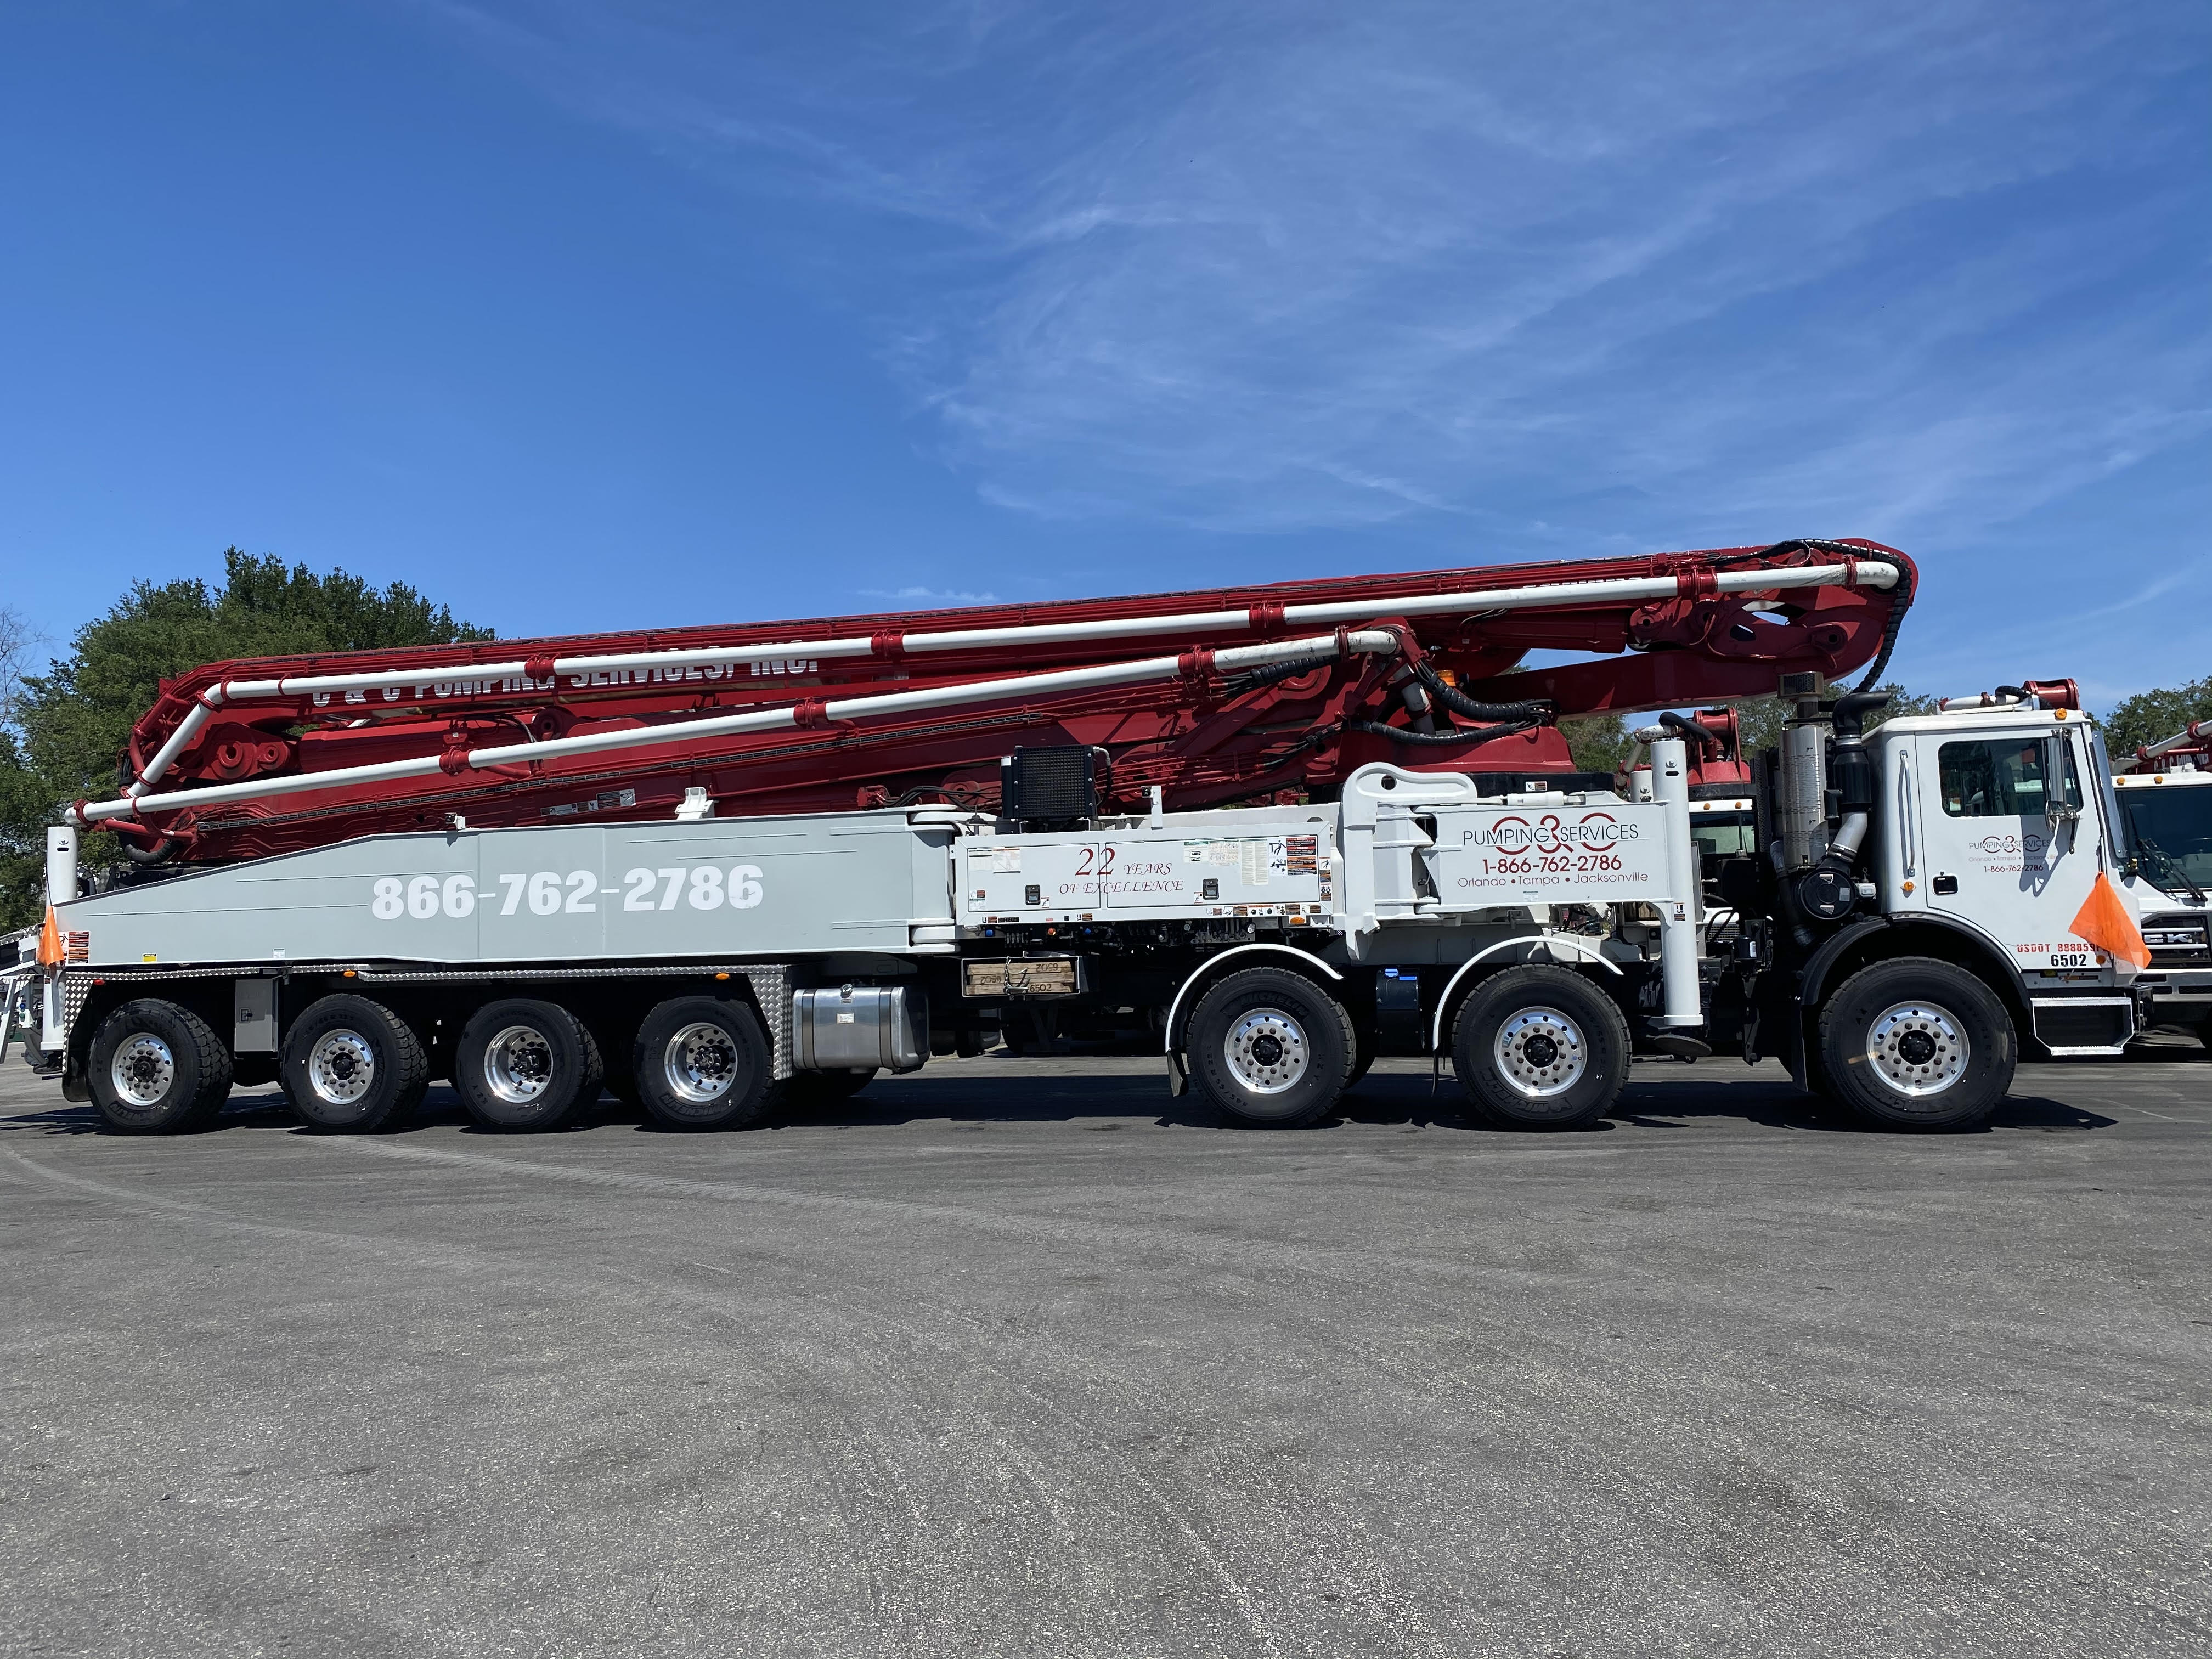 65 Meter concrete boom pump, provided by C&C Pumping Services Inc. 